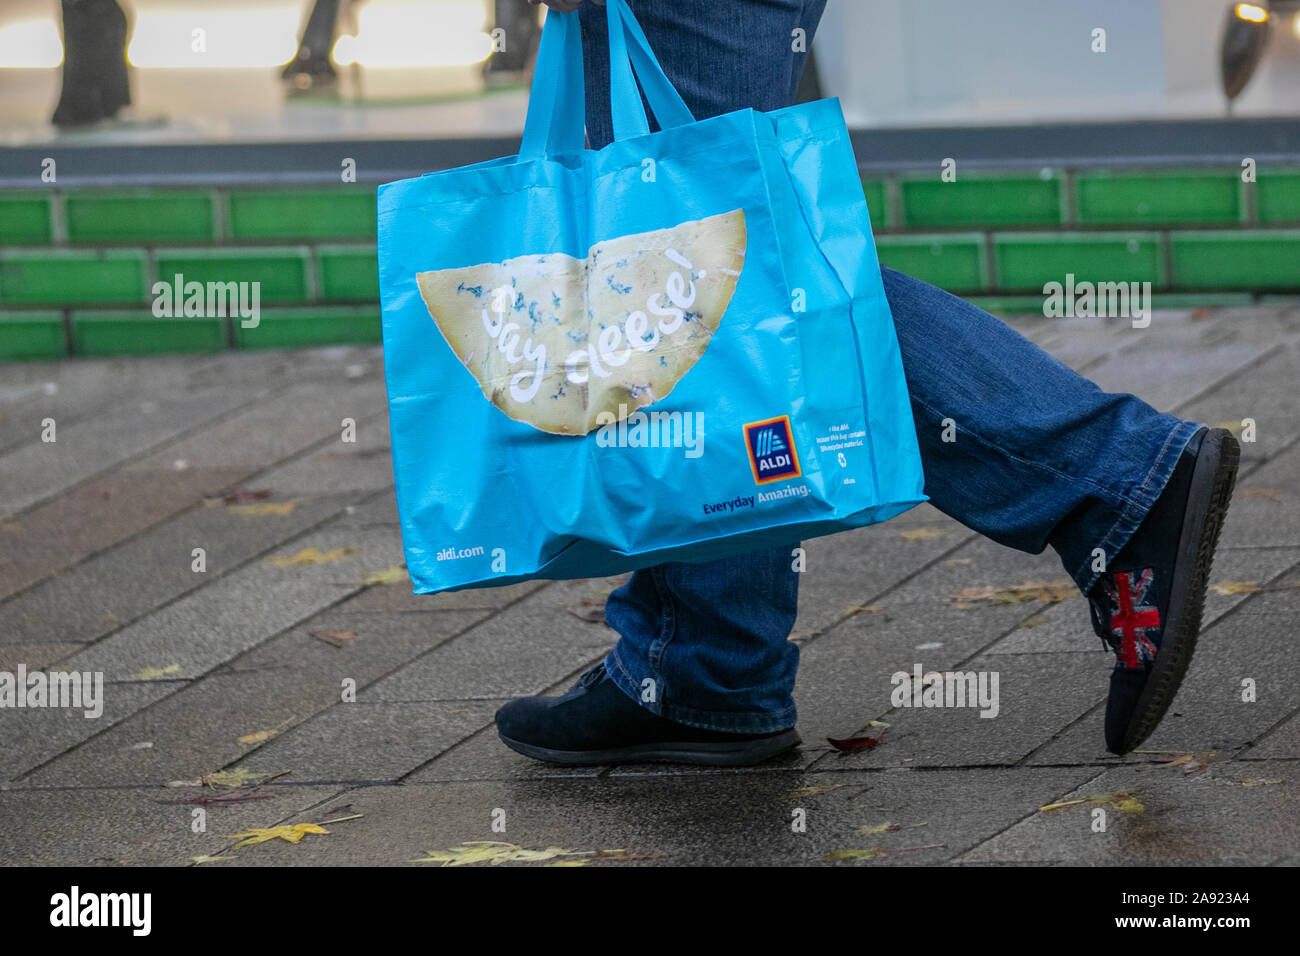 https://c8.alamy.com/comp/2A923A4/aldi-blue-say-cheese-100-blue-recycled-plastic-reusable-supermarket-bags-for-life-fishergate-preston-uk-2A923A4.jpg